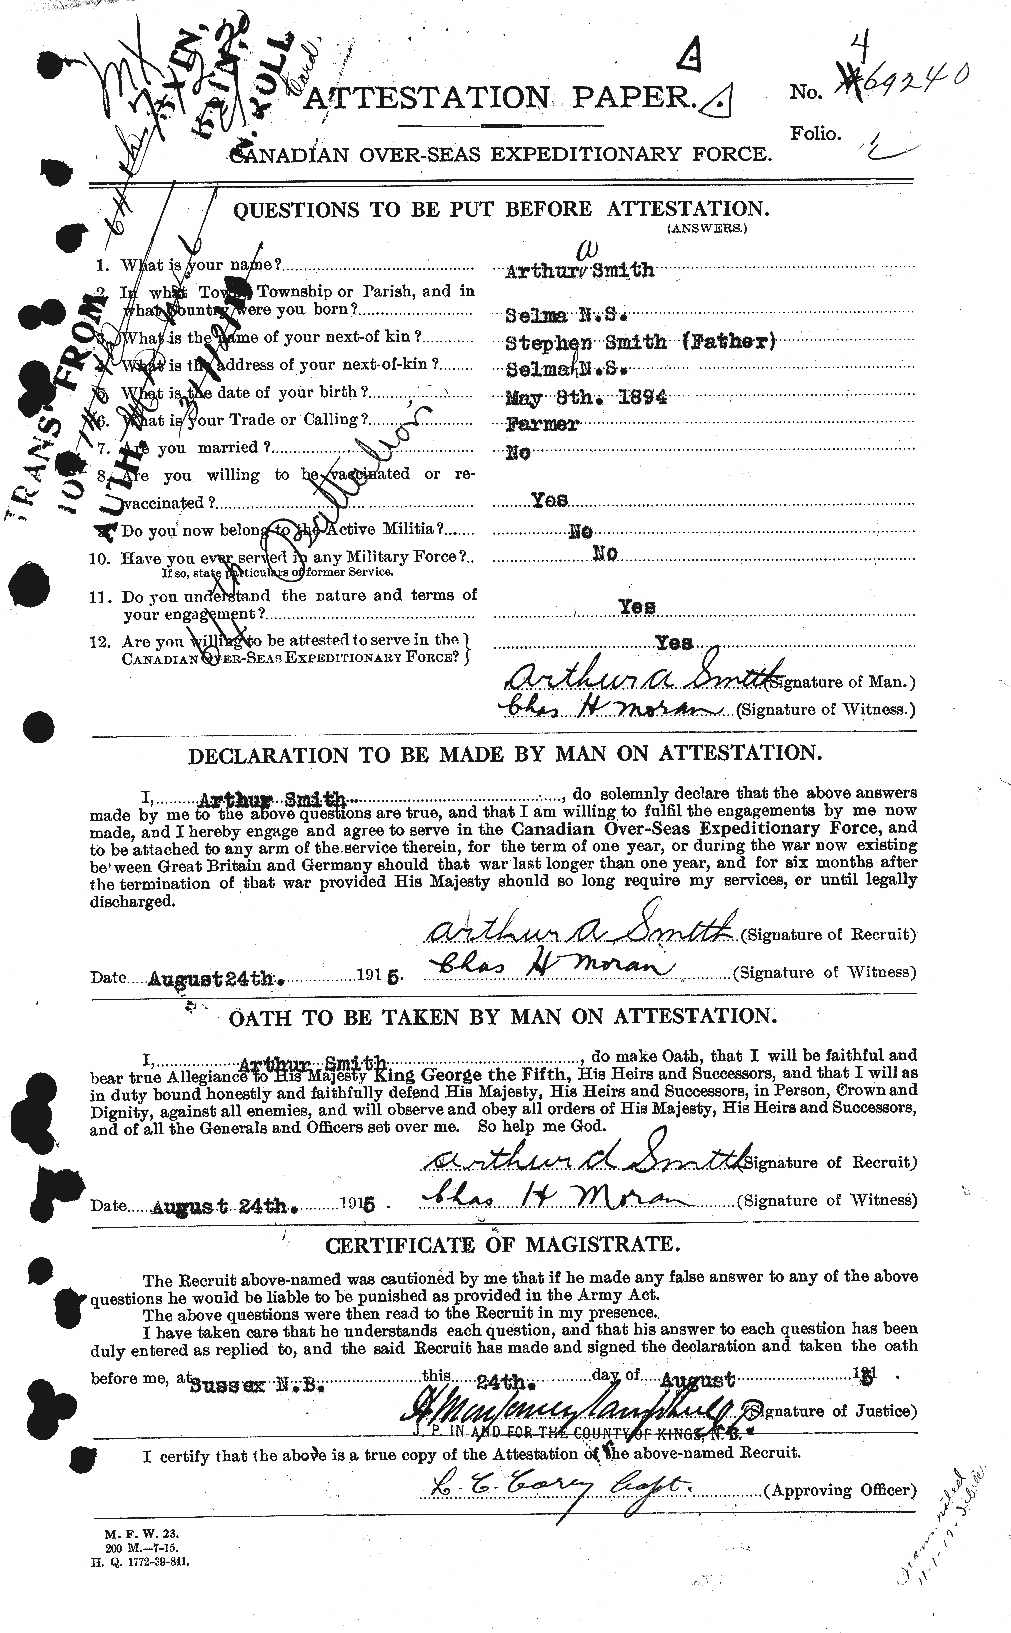 Personnel Records of the First World War - CEF 101970a